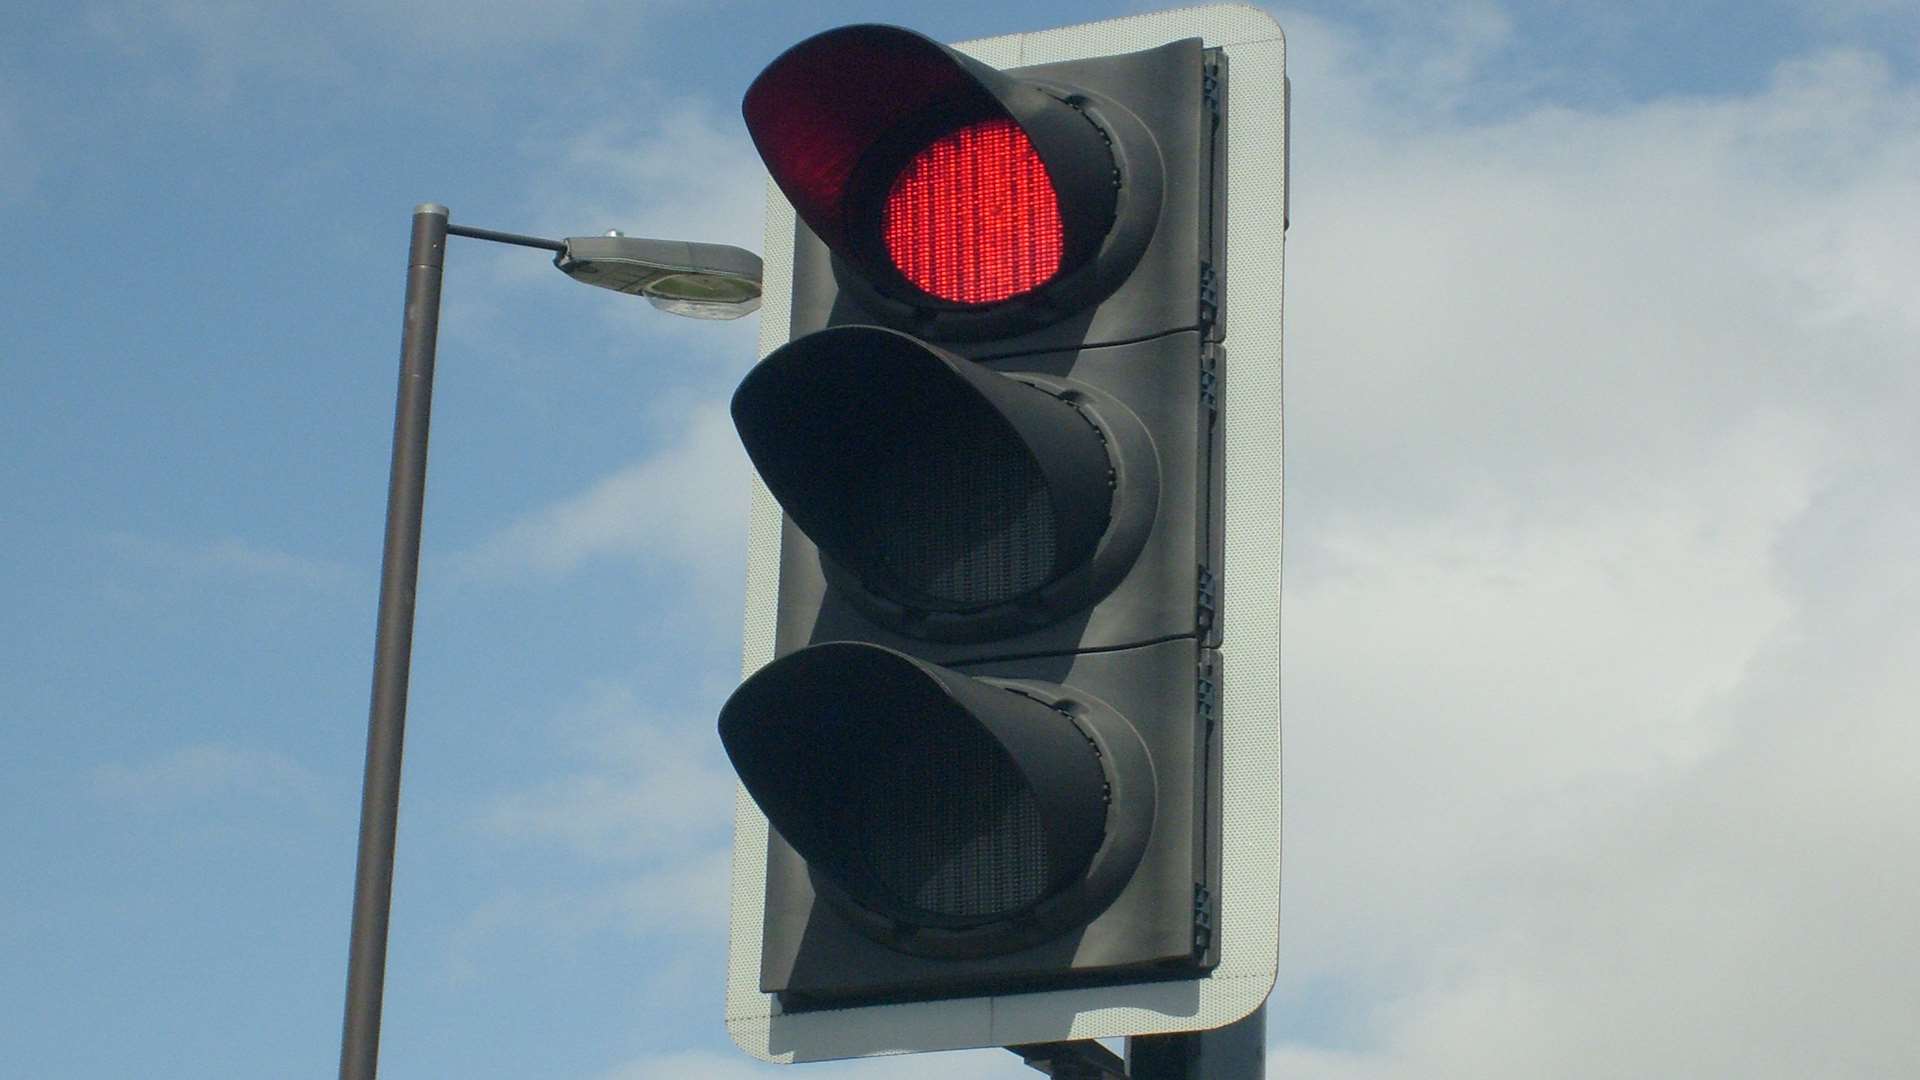 The traffic lights are out. Stock image